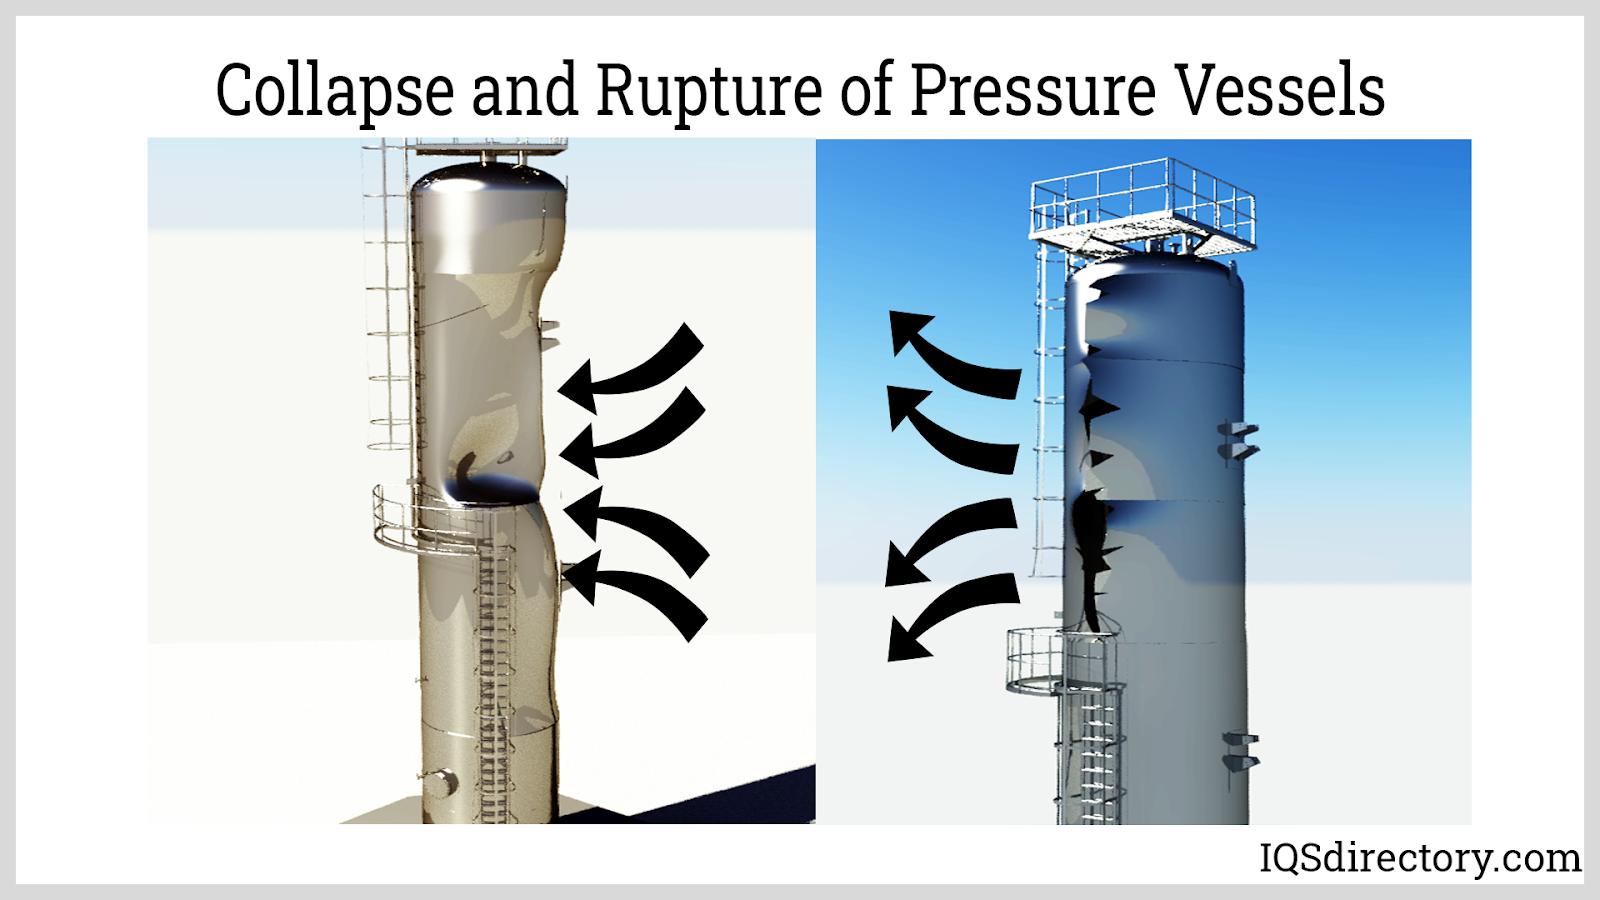 Collapse and Rupture of Pressure Vessels